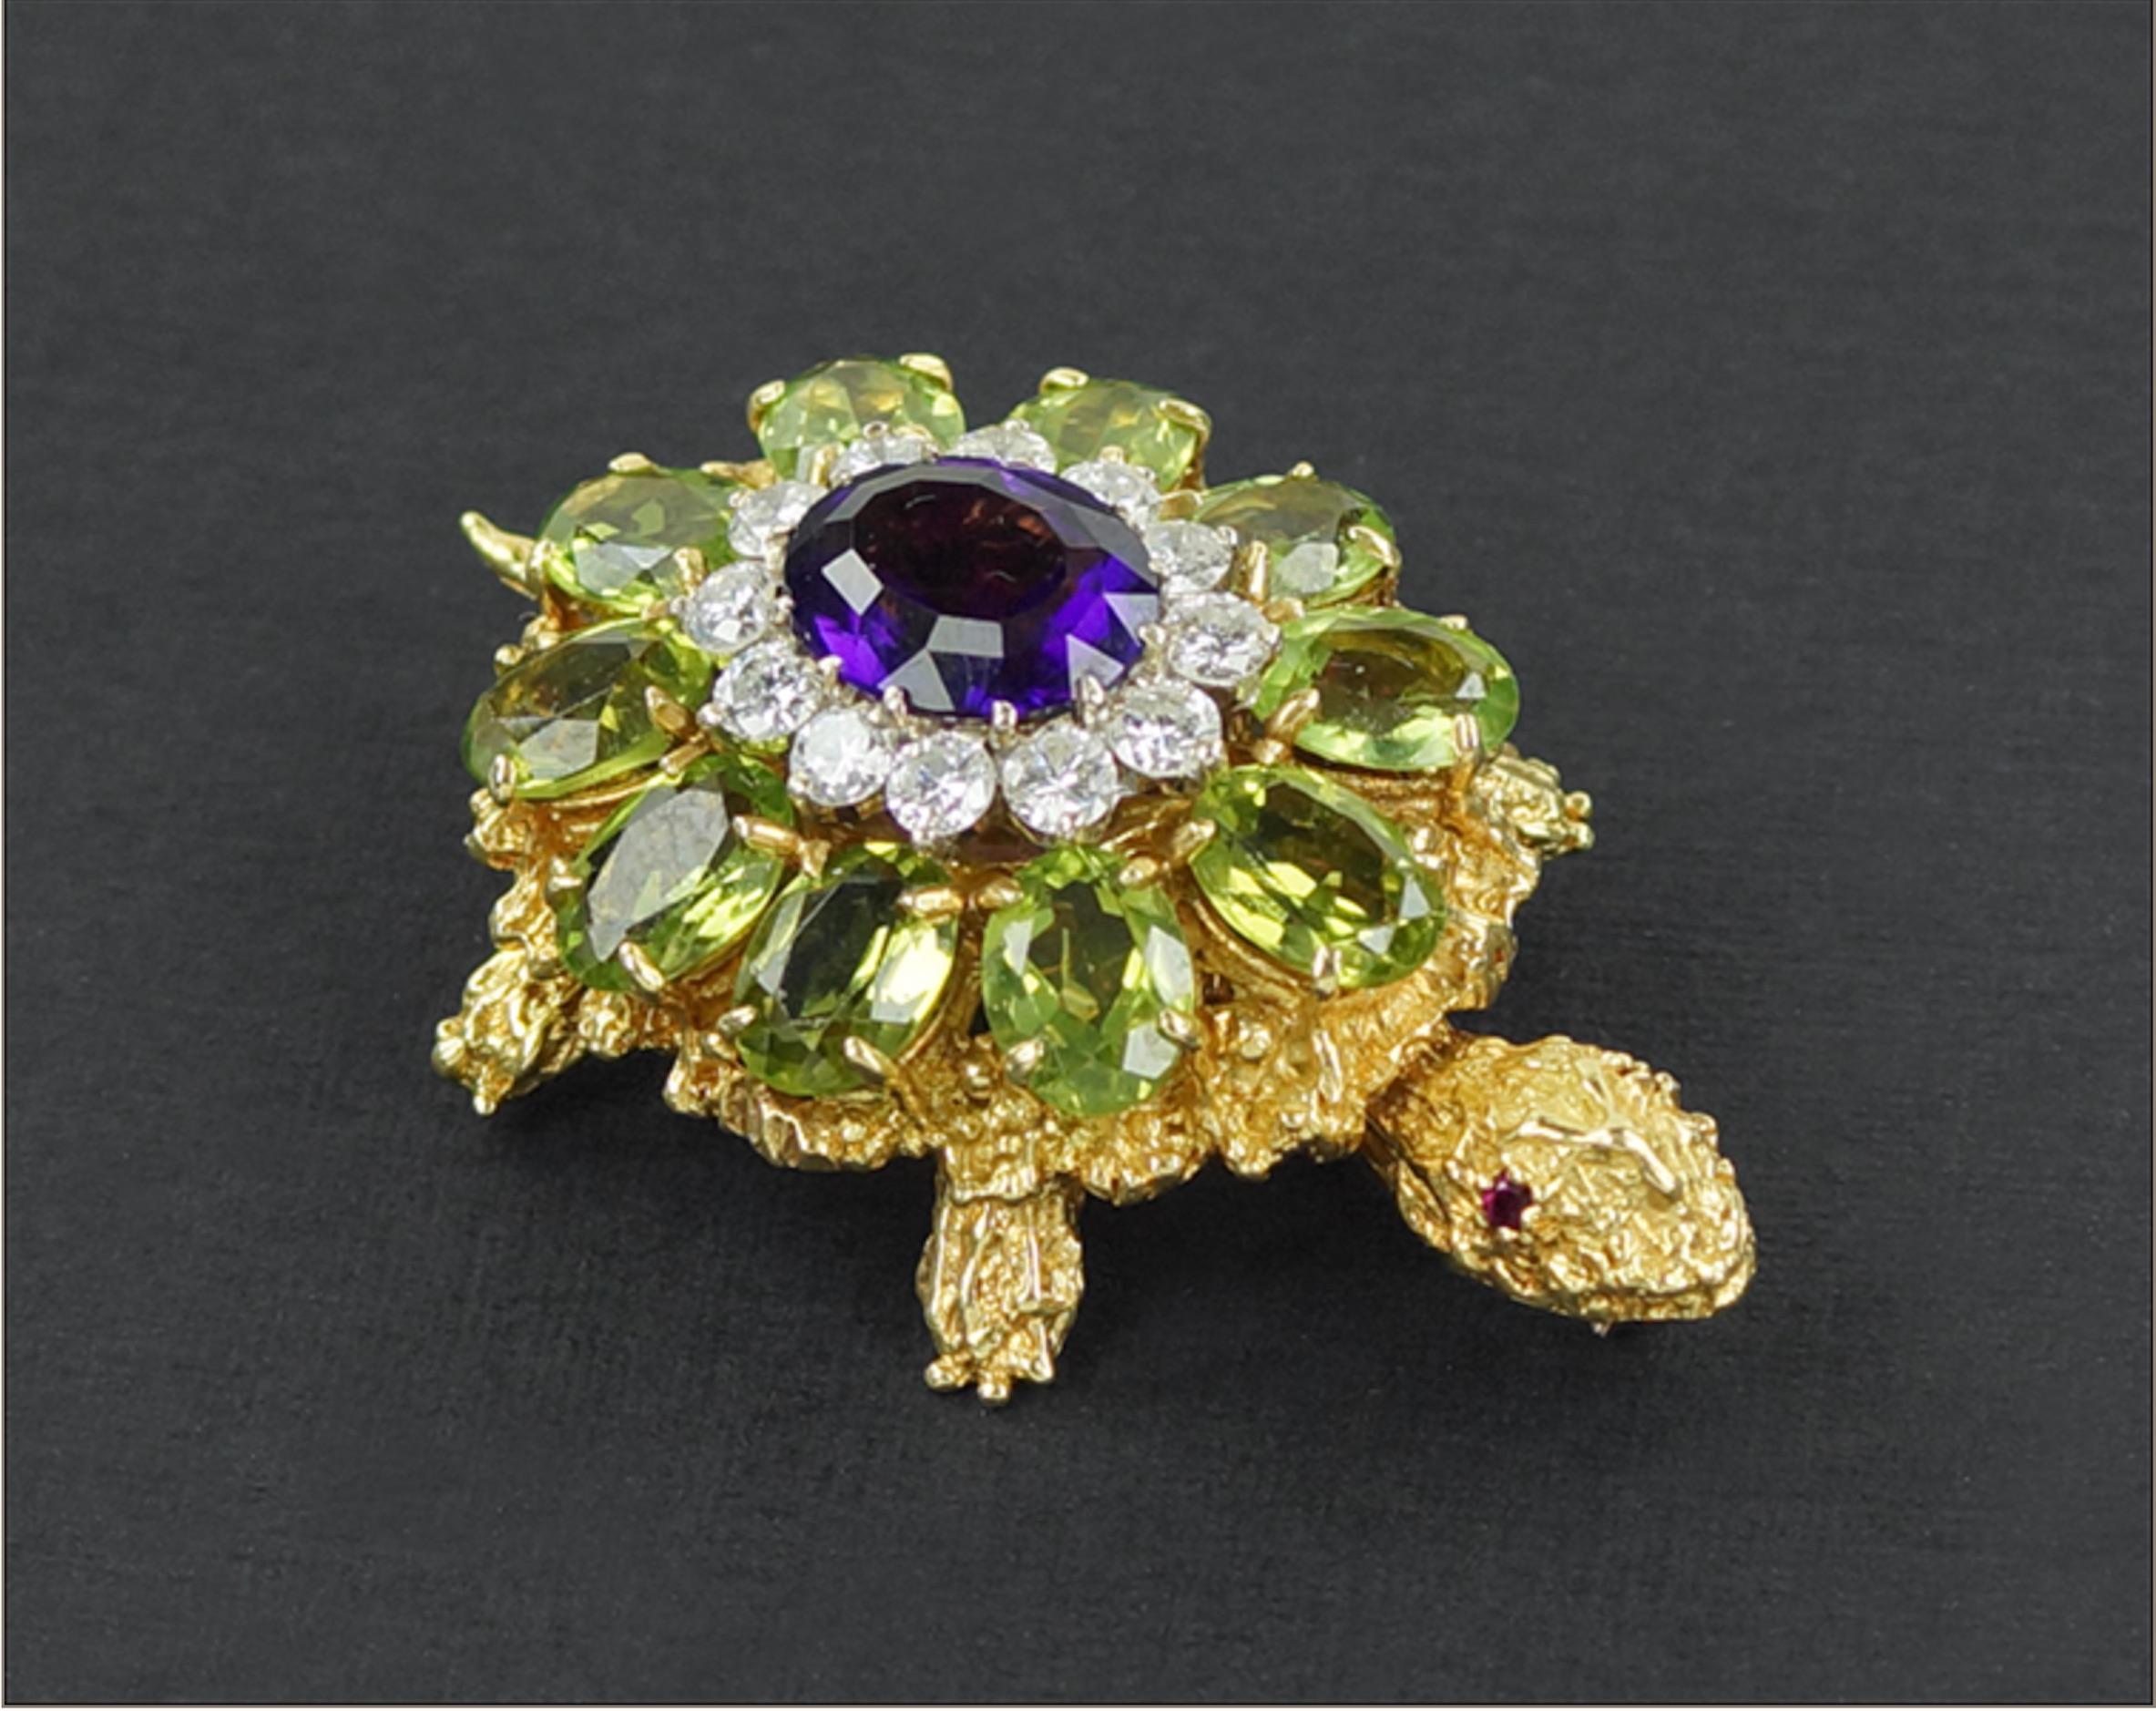 18 Karat Yellow Gold, Amethyst, Diamond, Peridot Pin The The Style Of Rosenthal. For Sale 1